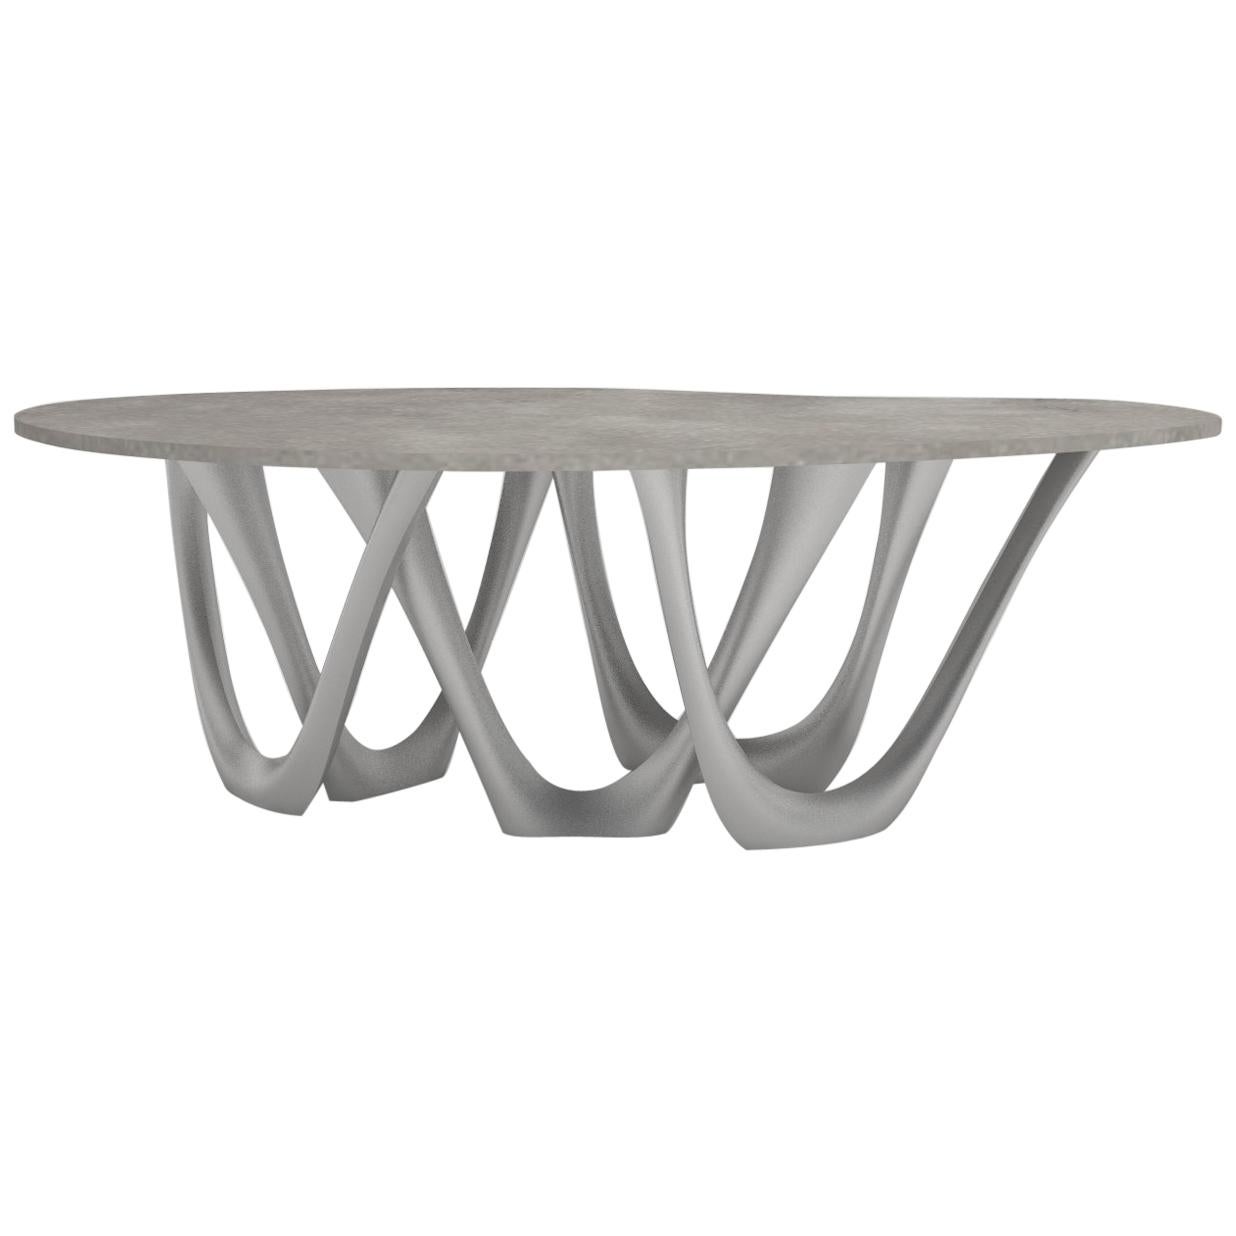 G-Table B+C in Brushed Aluminum with Concrete Top by Zieta For Sale